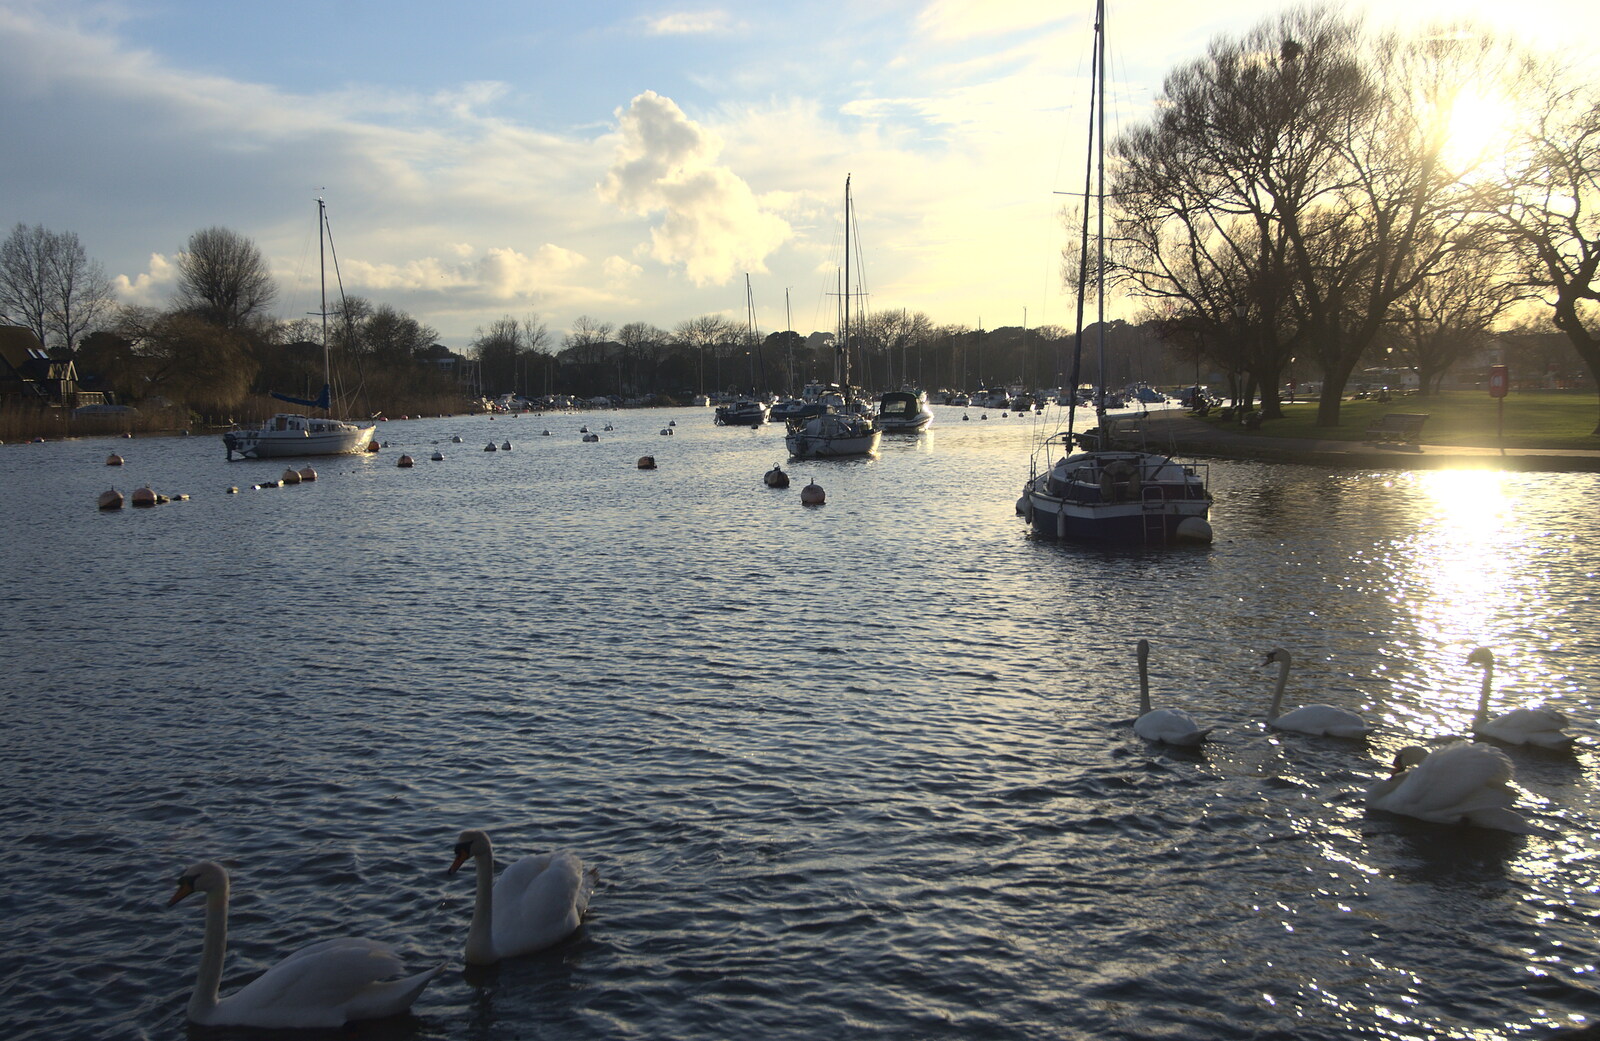 Looking up the River Avon from Barton on Sea Beach, and a Trip to Christchurch, Hampshire and Dorset - 19th March 2013